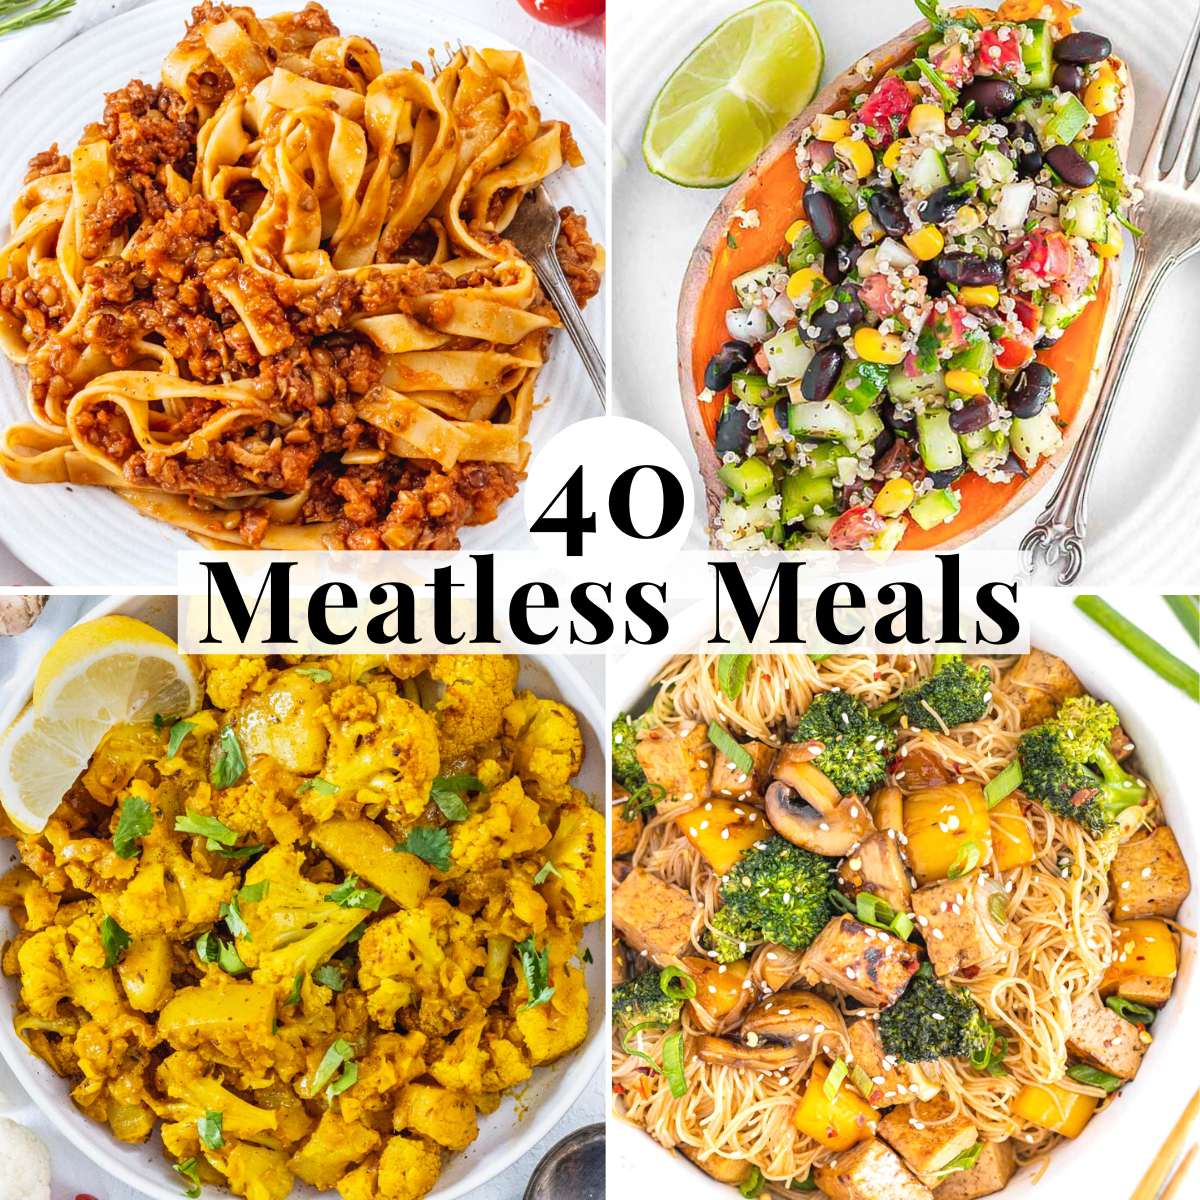 Meatless meals for easy dinners